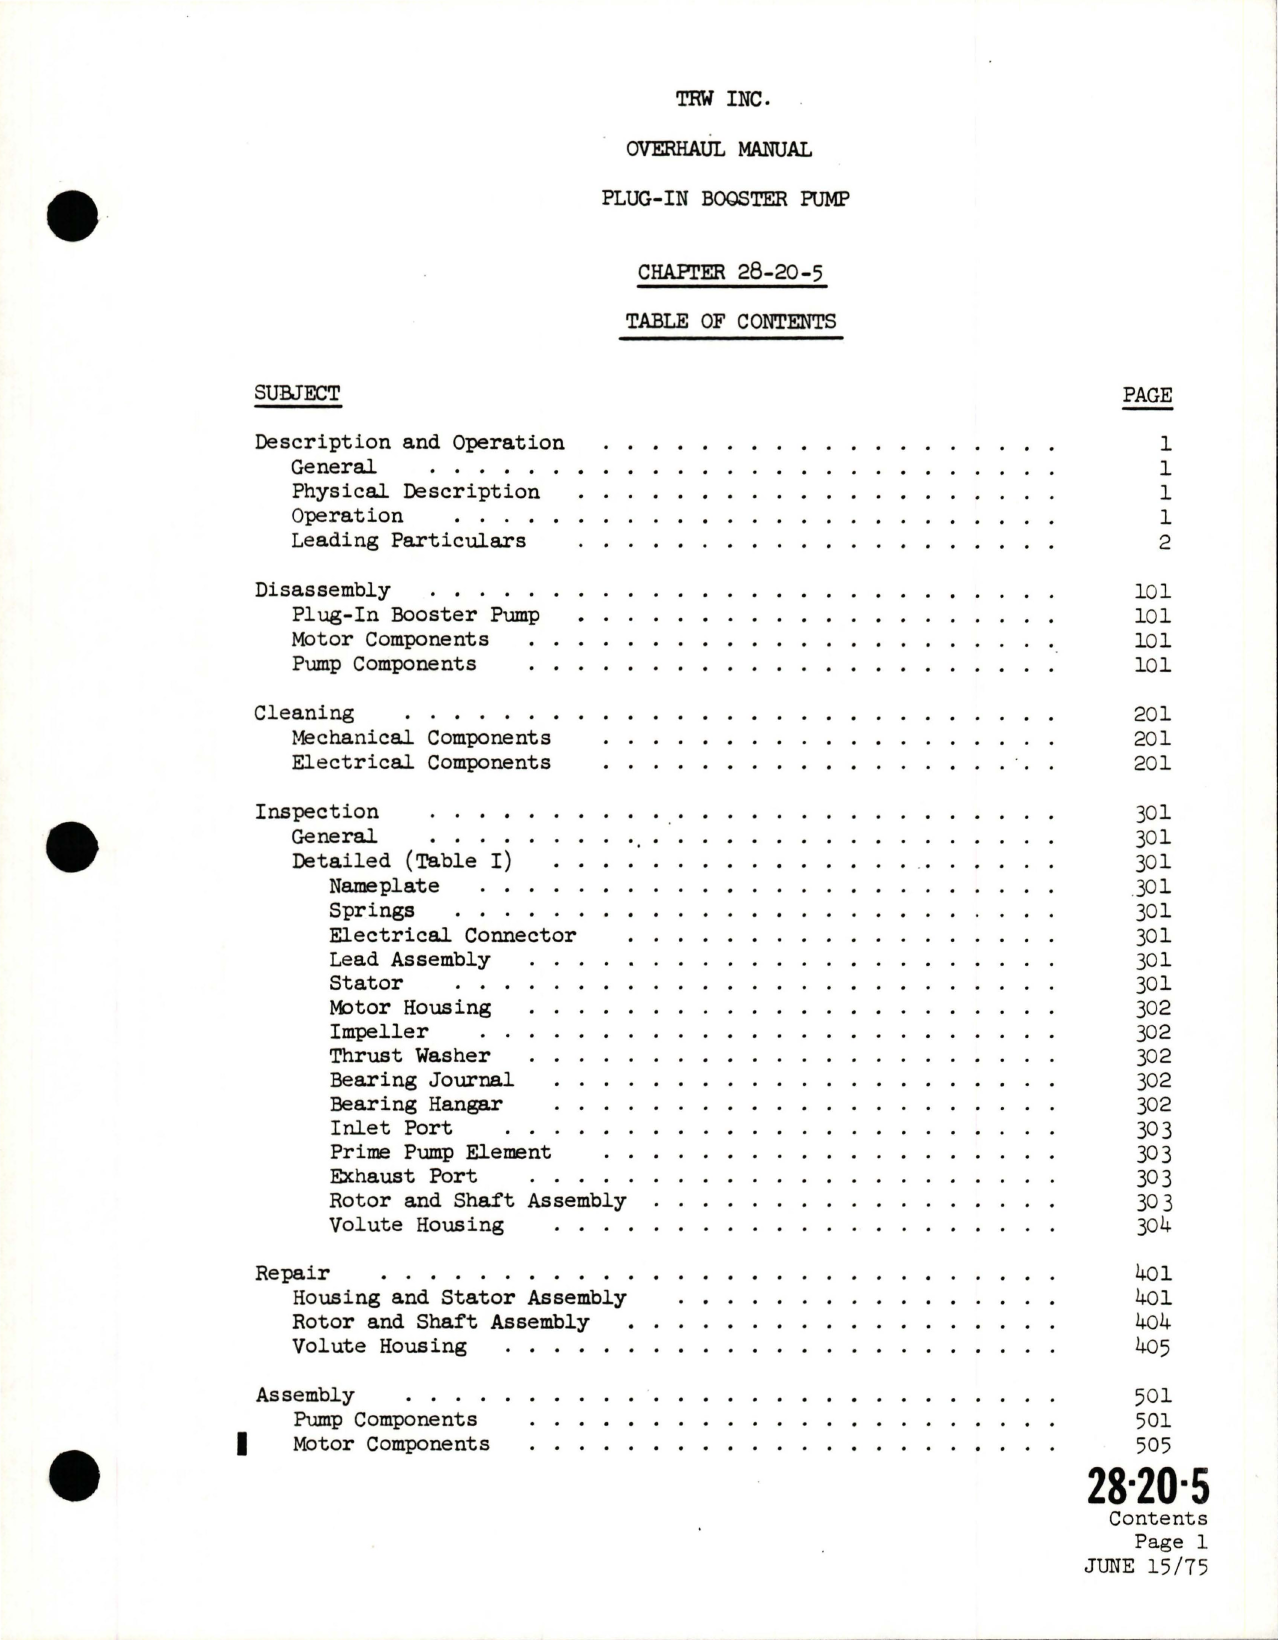 Sample page 7 from AirCorps Library document: Overhaul with Illustrated Parts Catalog for Plug-In Booster Pump - 382300-1, 382300-2, and 3823020-3 